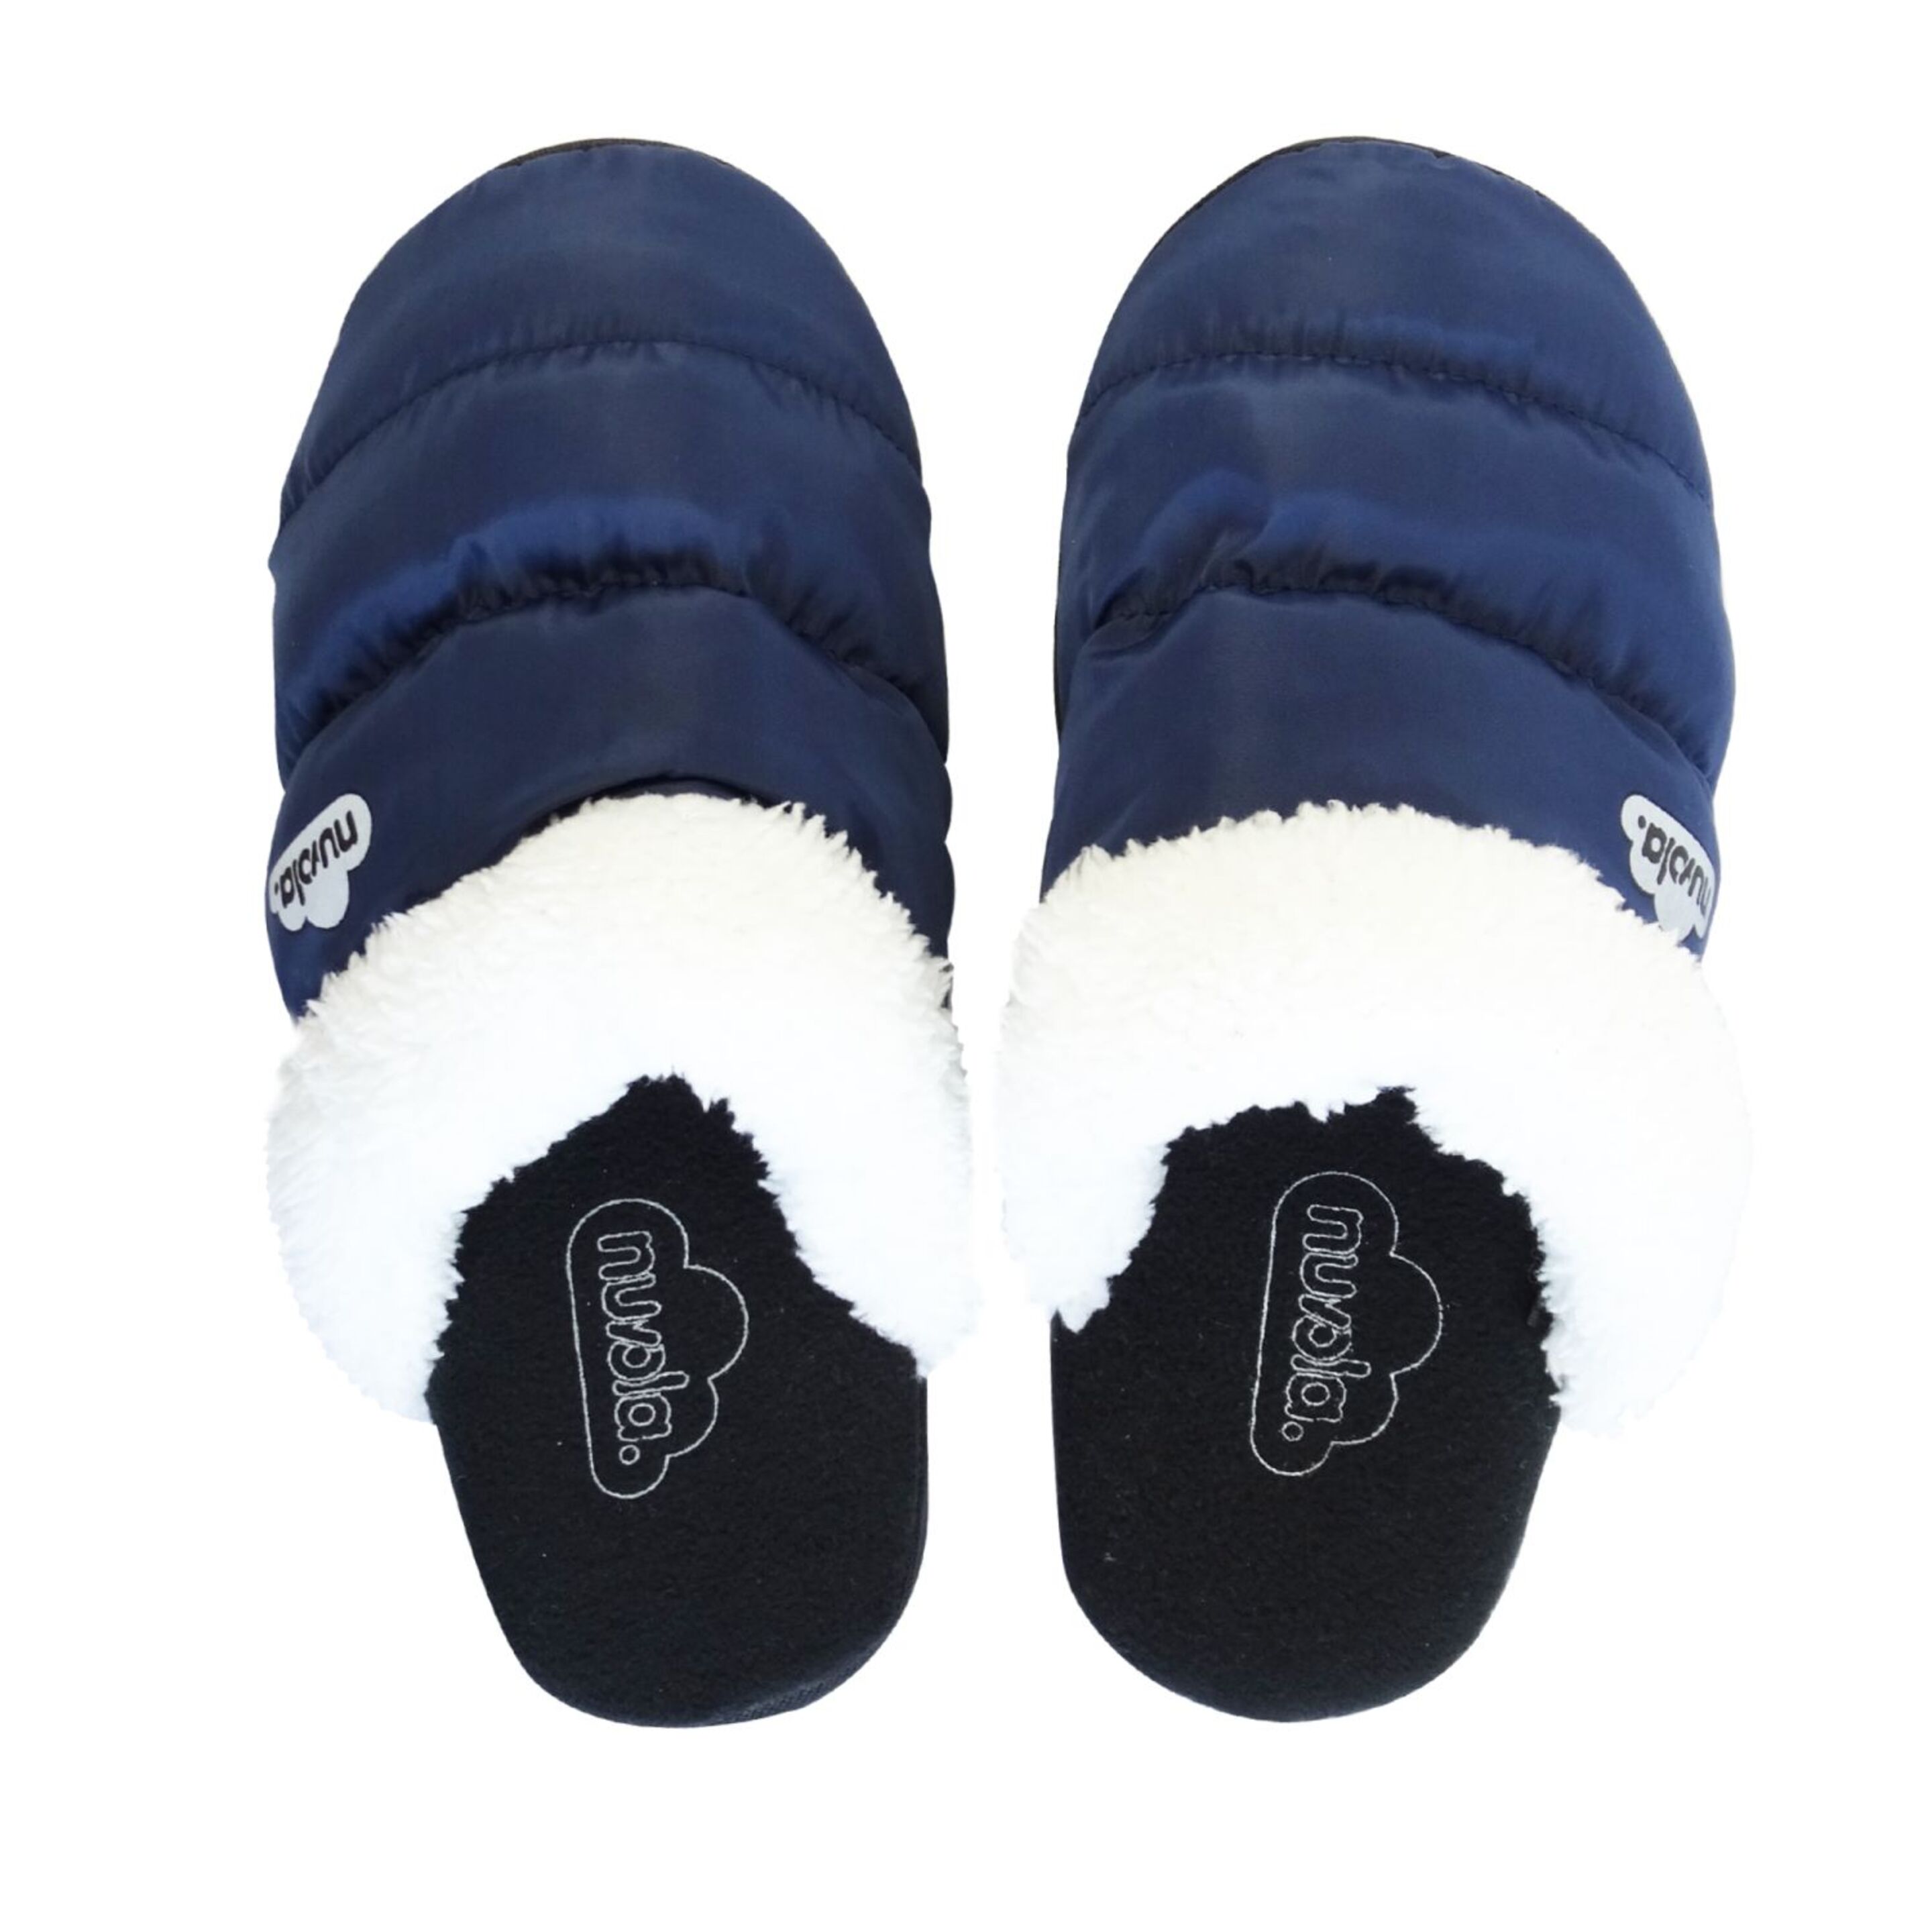 Slippers Camping Nuvola®,zueco Wolly Suela De Goma